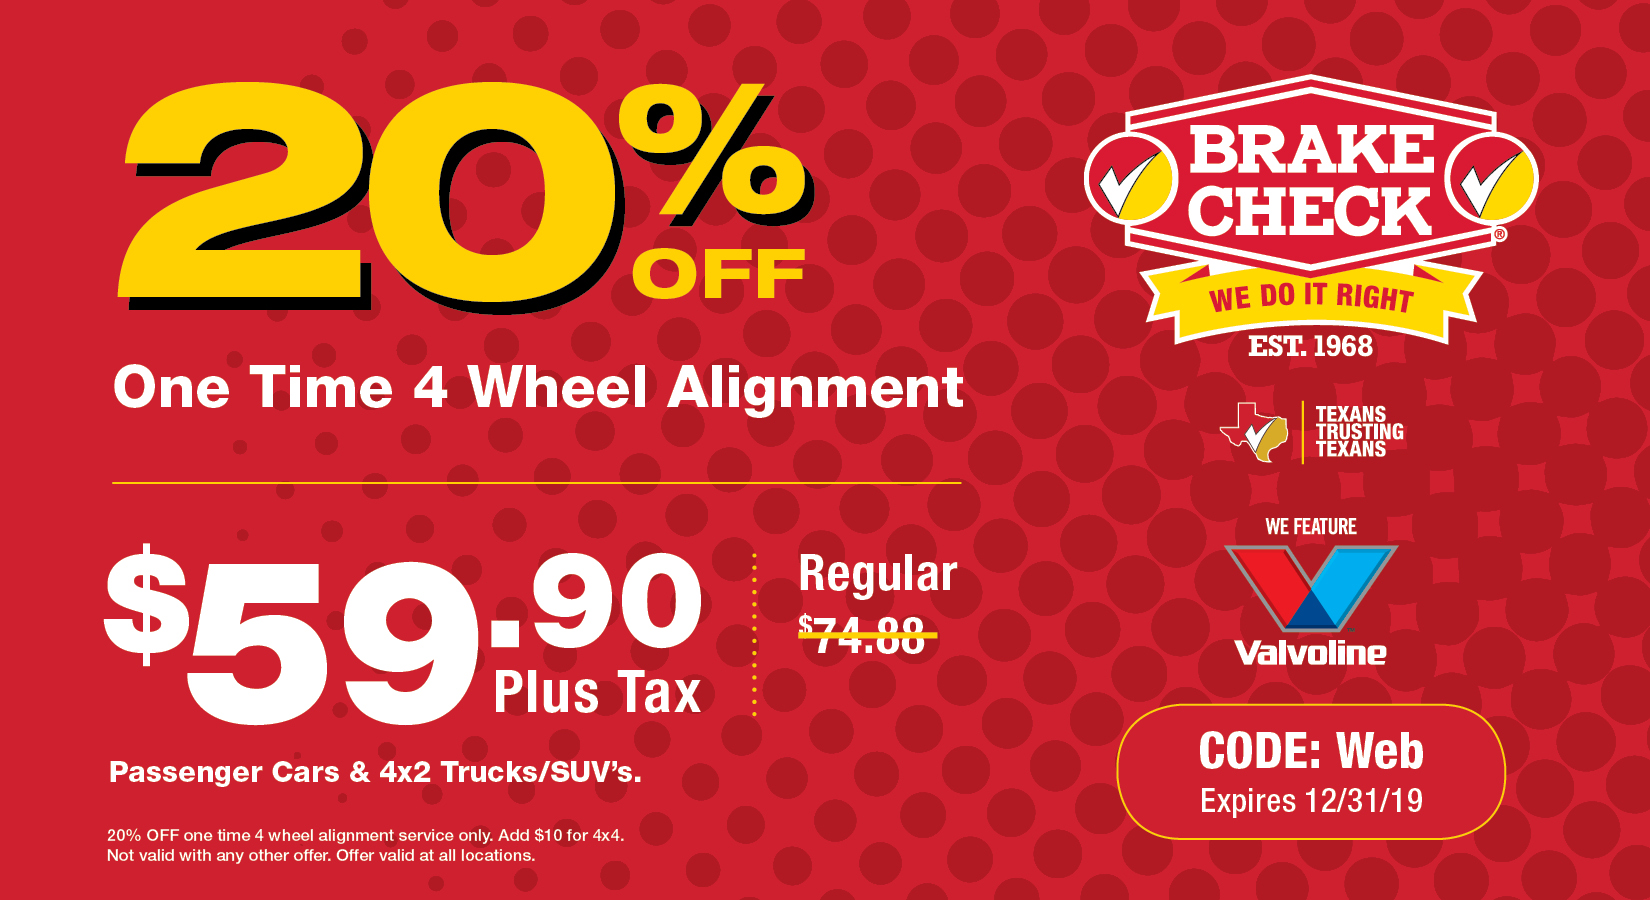 Brake Check, Highest Quality Parts and Every Day Low Prices.